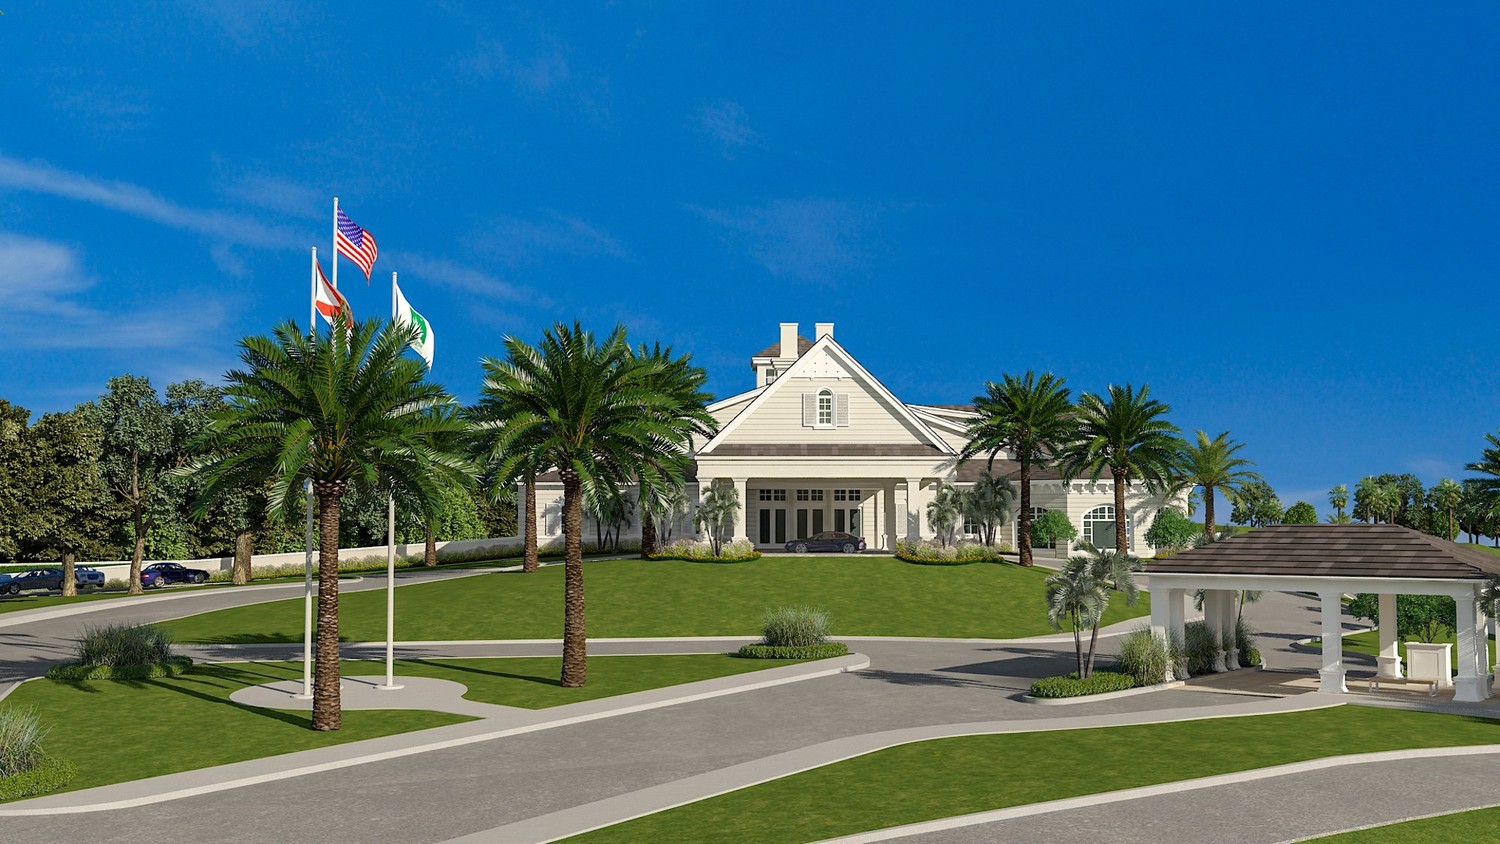 A rendering displays the vision for the front of the new members’ clubhouse at Sawgrass Country Club, which is expected to be complete by late fall 2020.